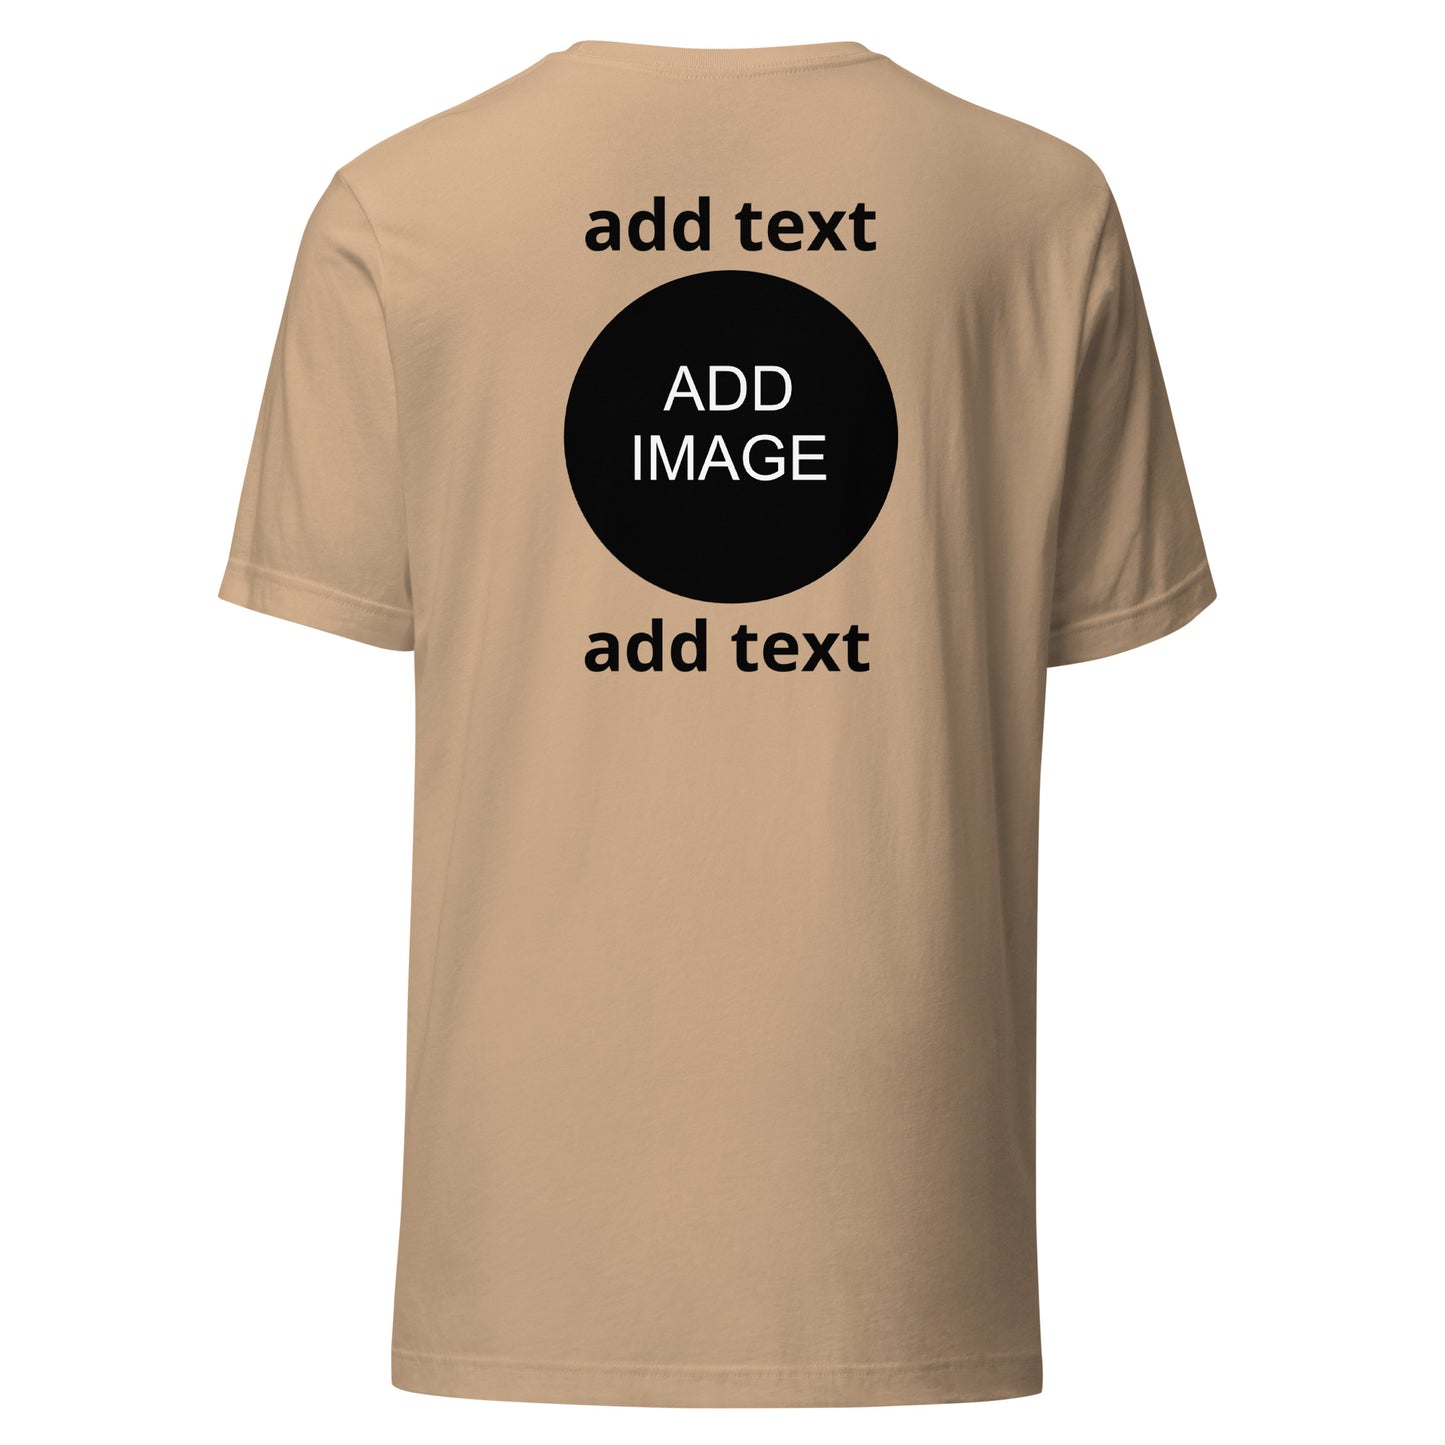 Large - XL Unisex [front & back image with top & bottom black text]